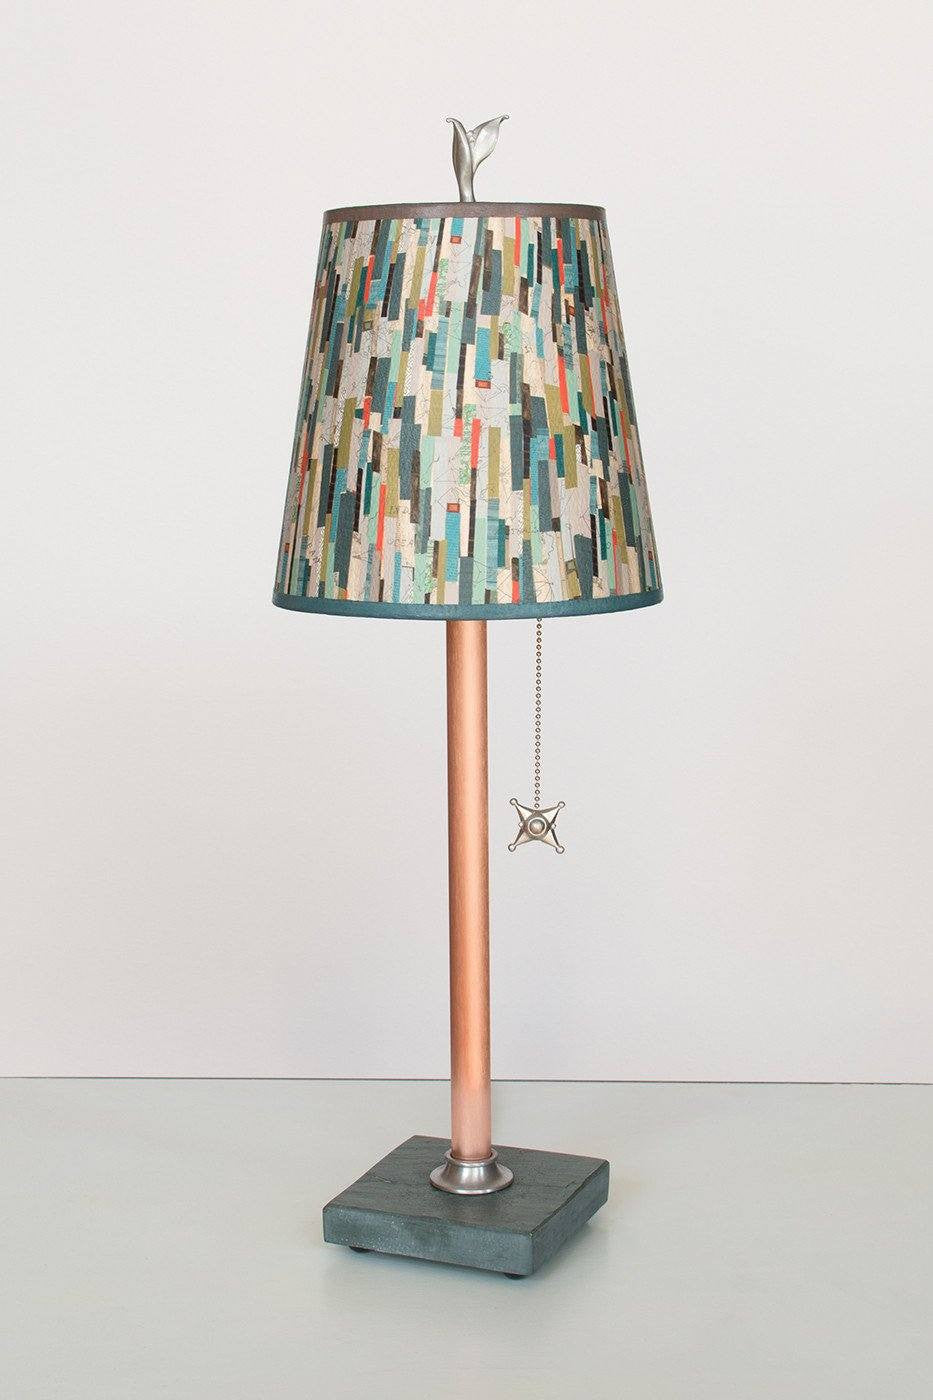 Copper Table Lamp on Vermont Slate Base with Small Drum Shade in Papers